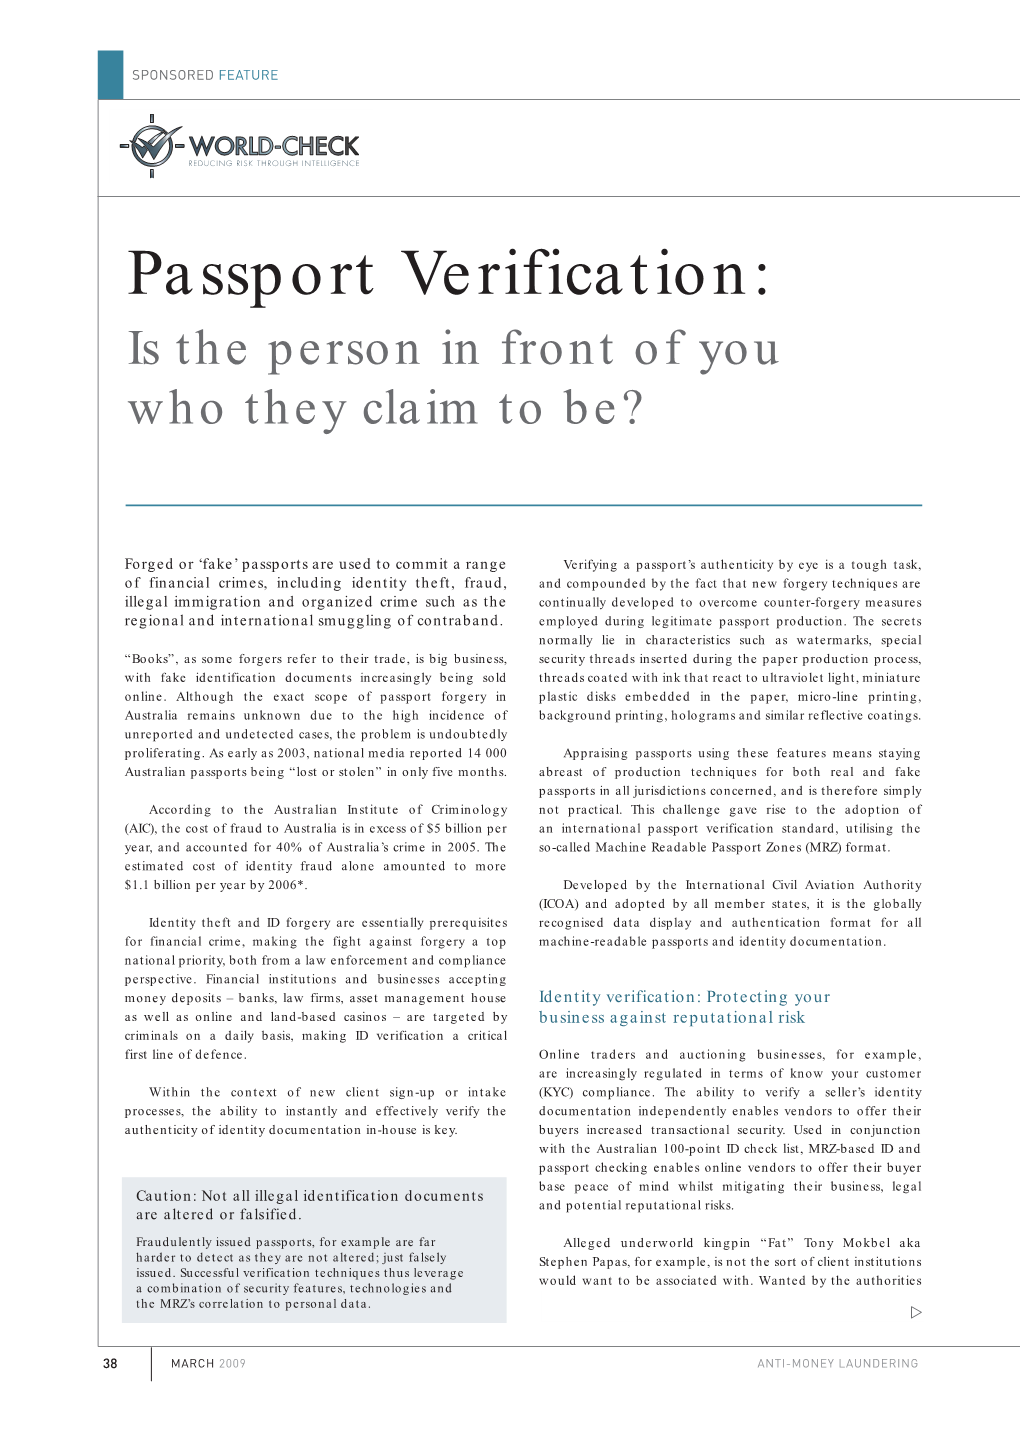 Passport Verification: Is the Person in Front of You Who They Claim to Be?